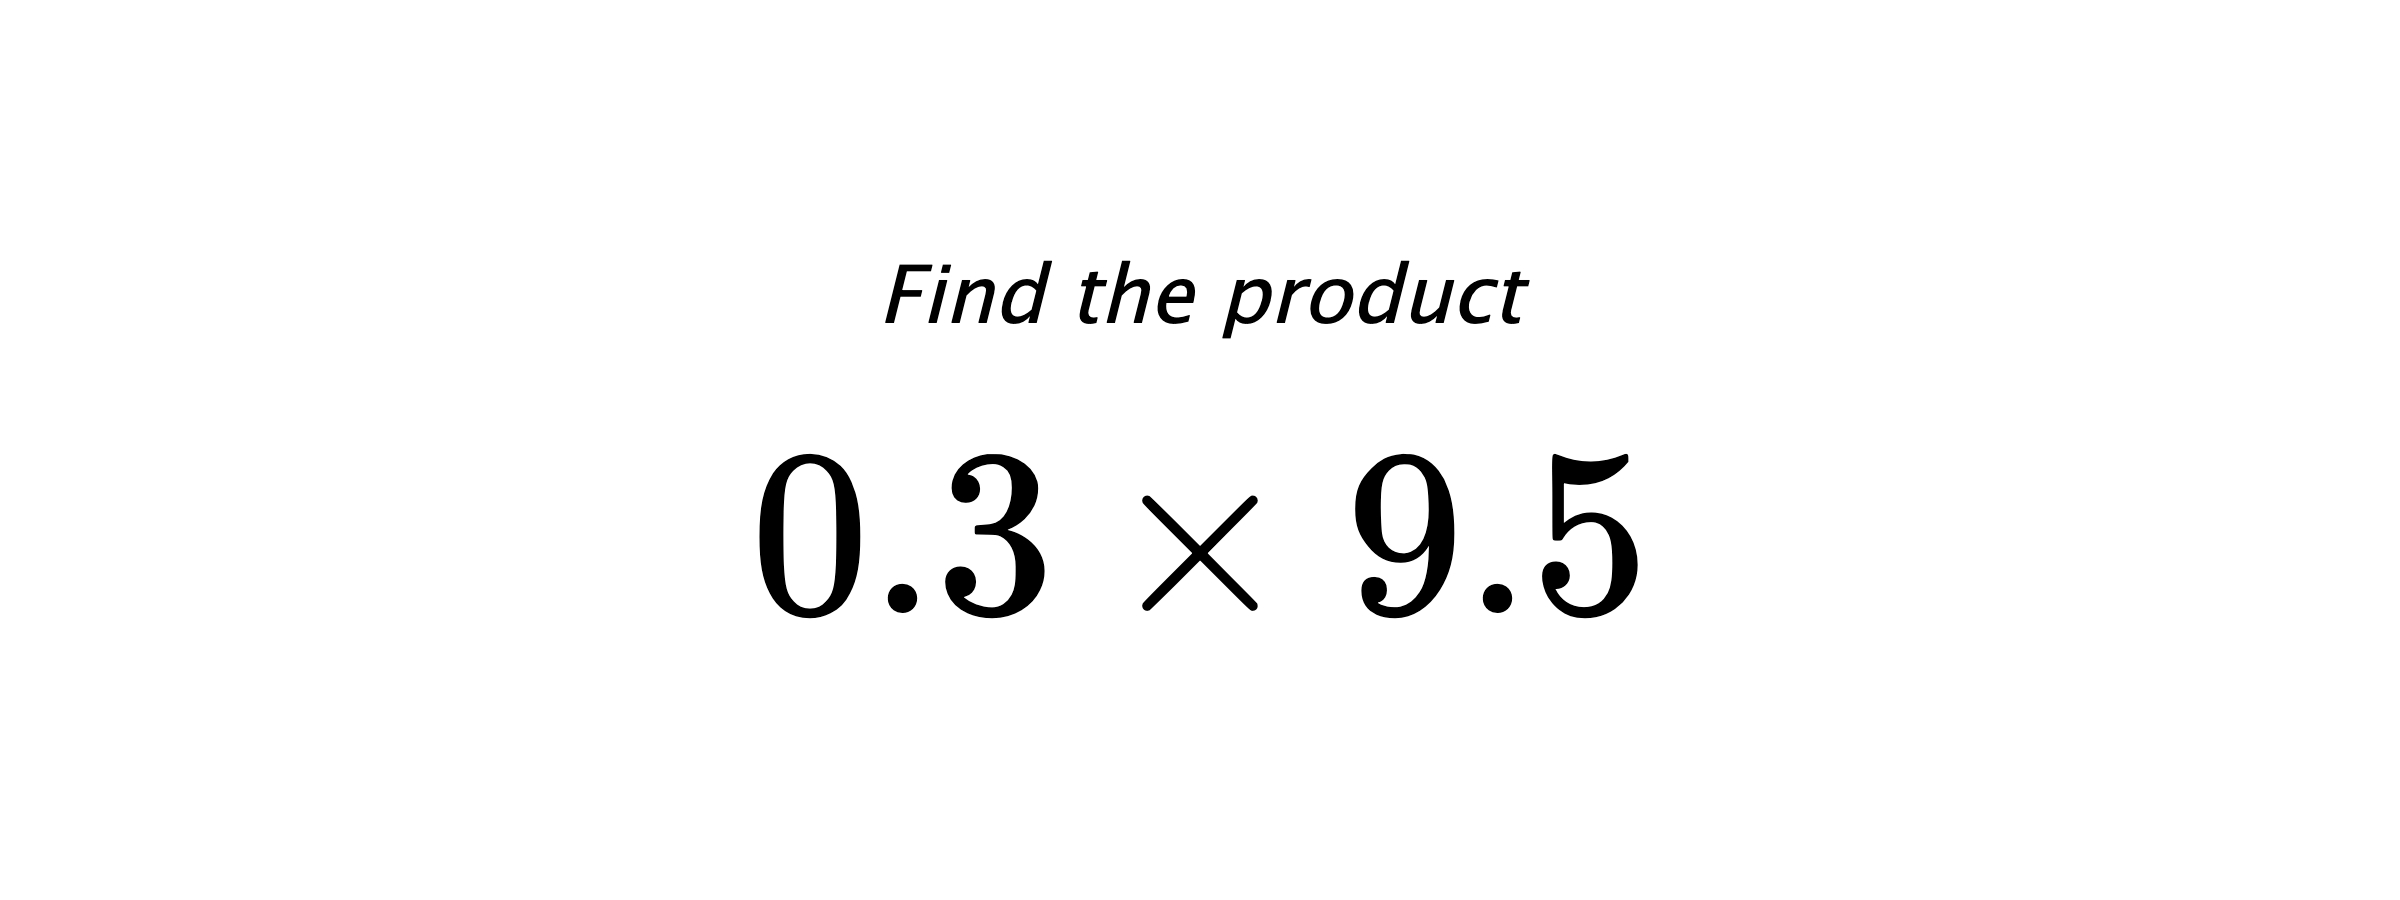 Find the product $ 0.3 \times 9.5 $